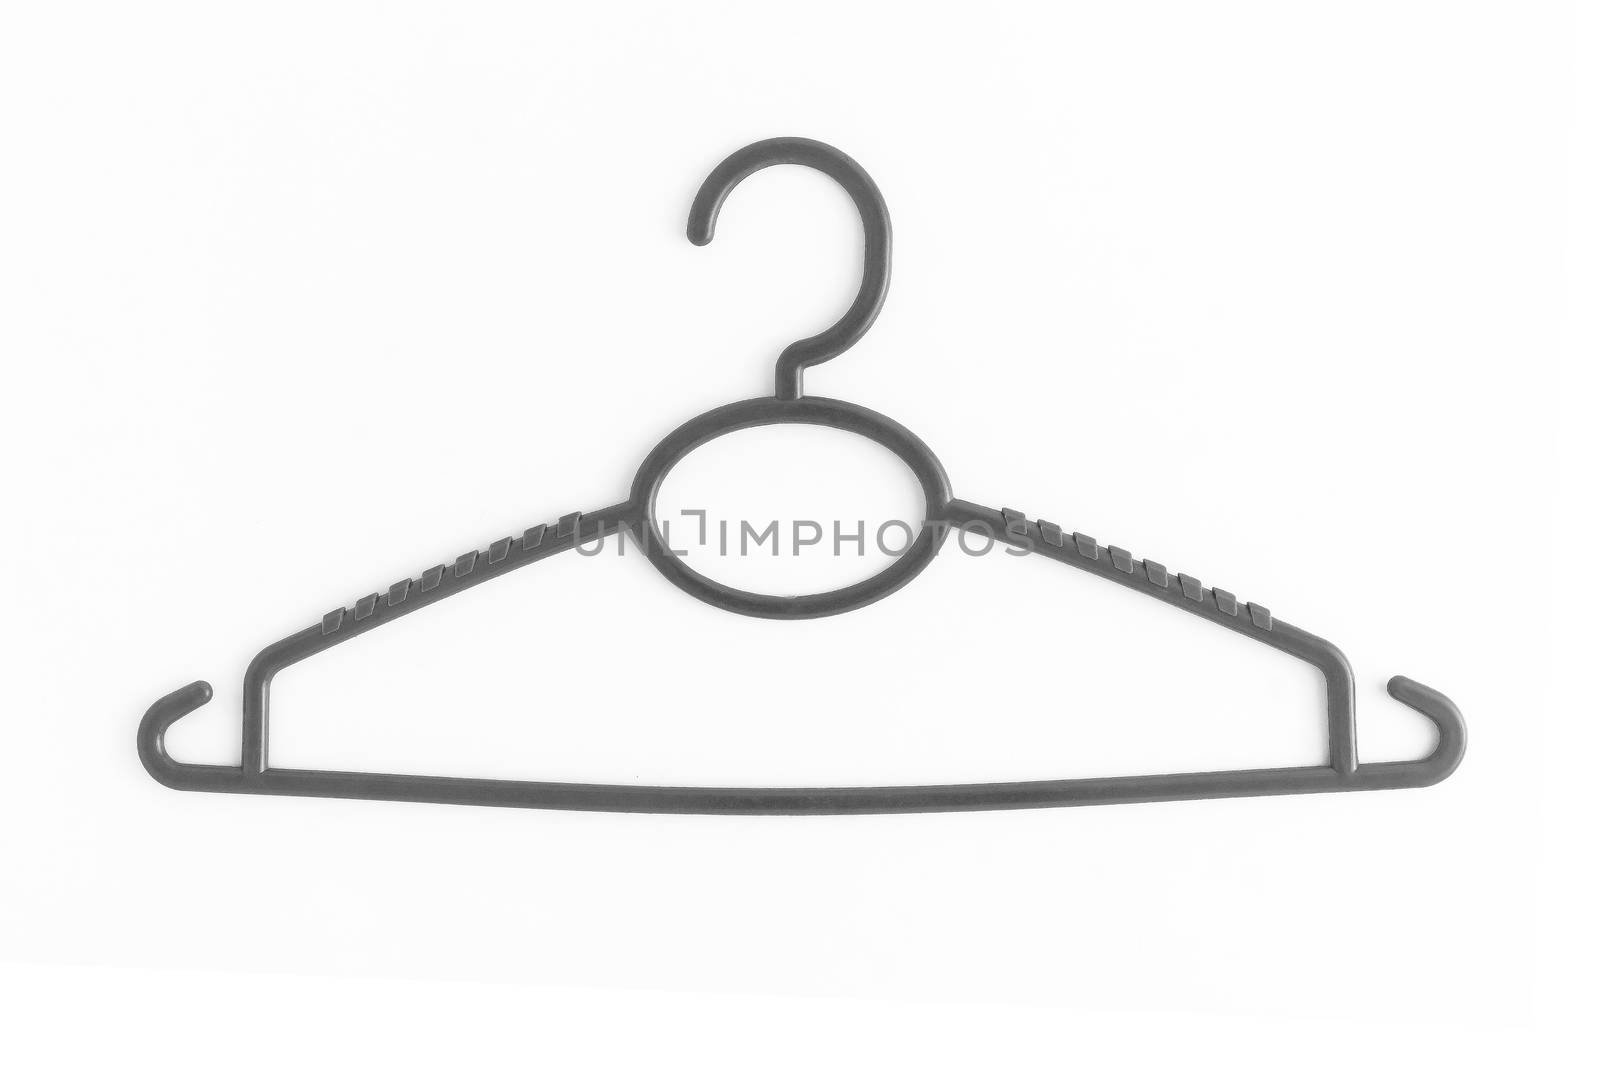 One colored plastic hanger, isolated on white background, close-up.